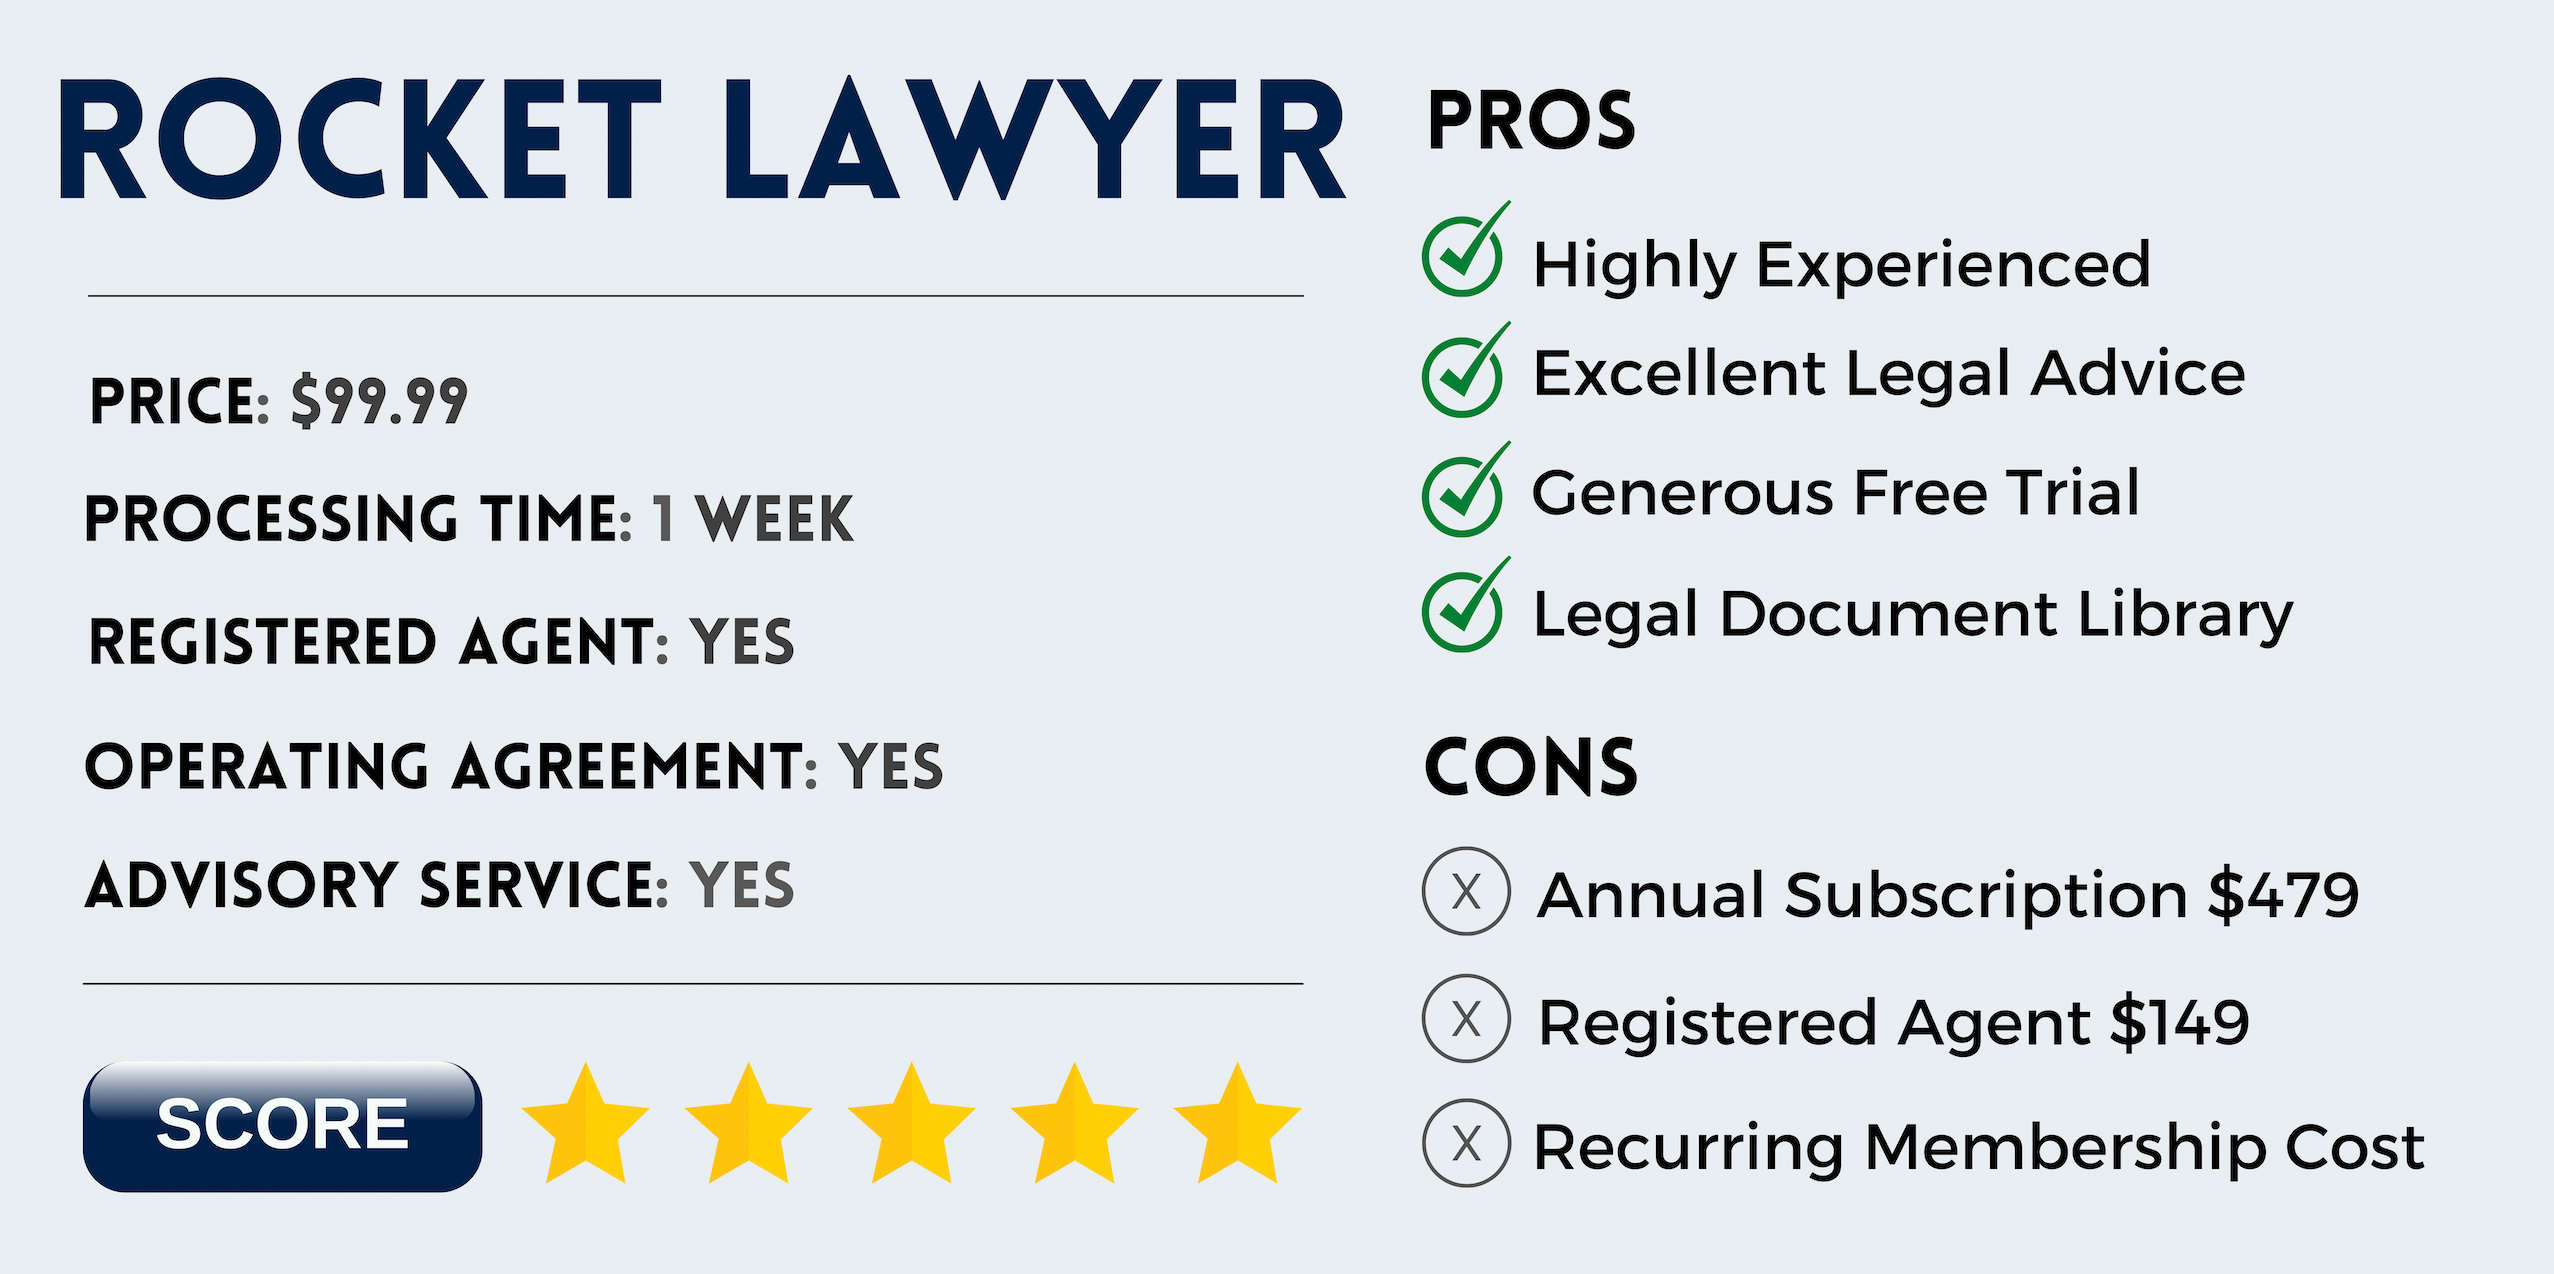 Rocket Lawyer LLC Formation Service Overview Pros Cons and Features